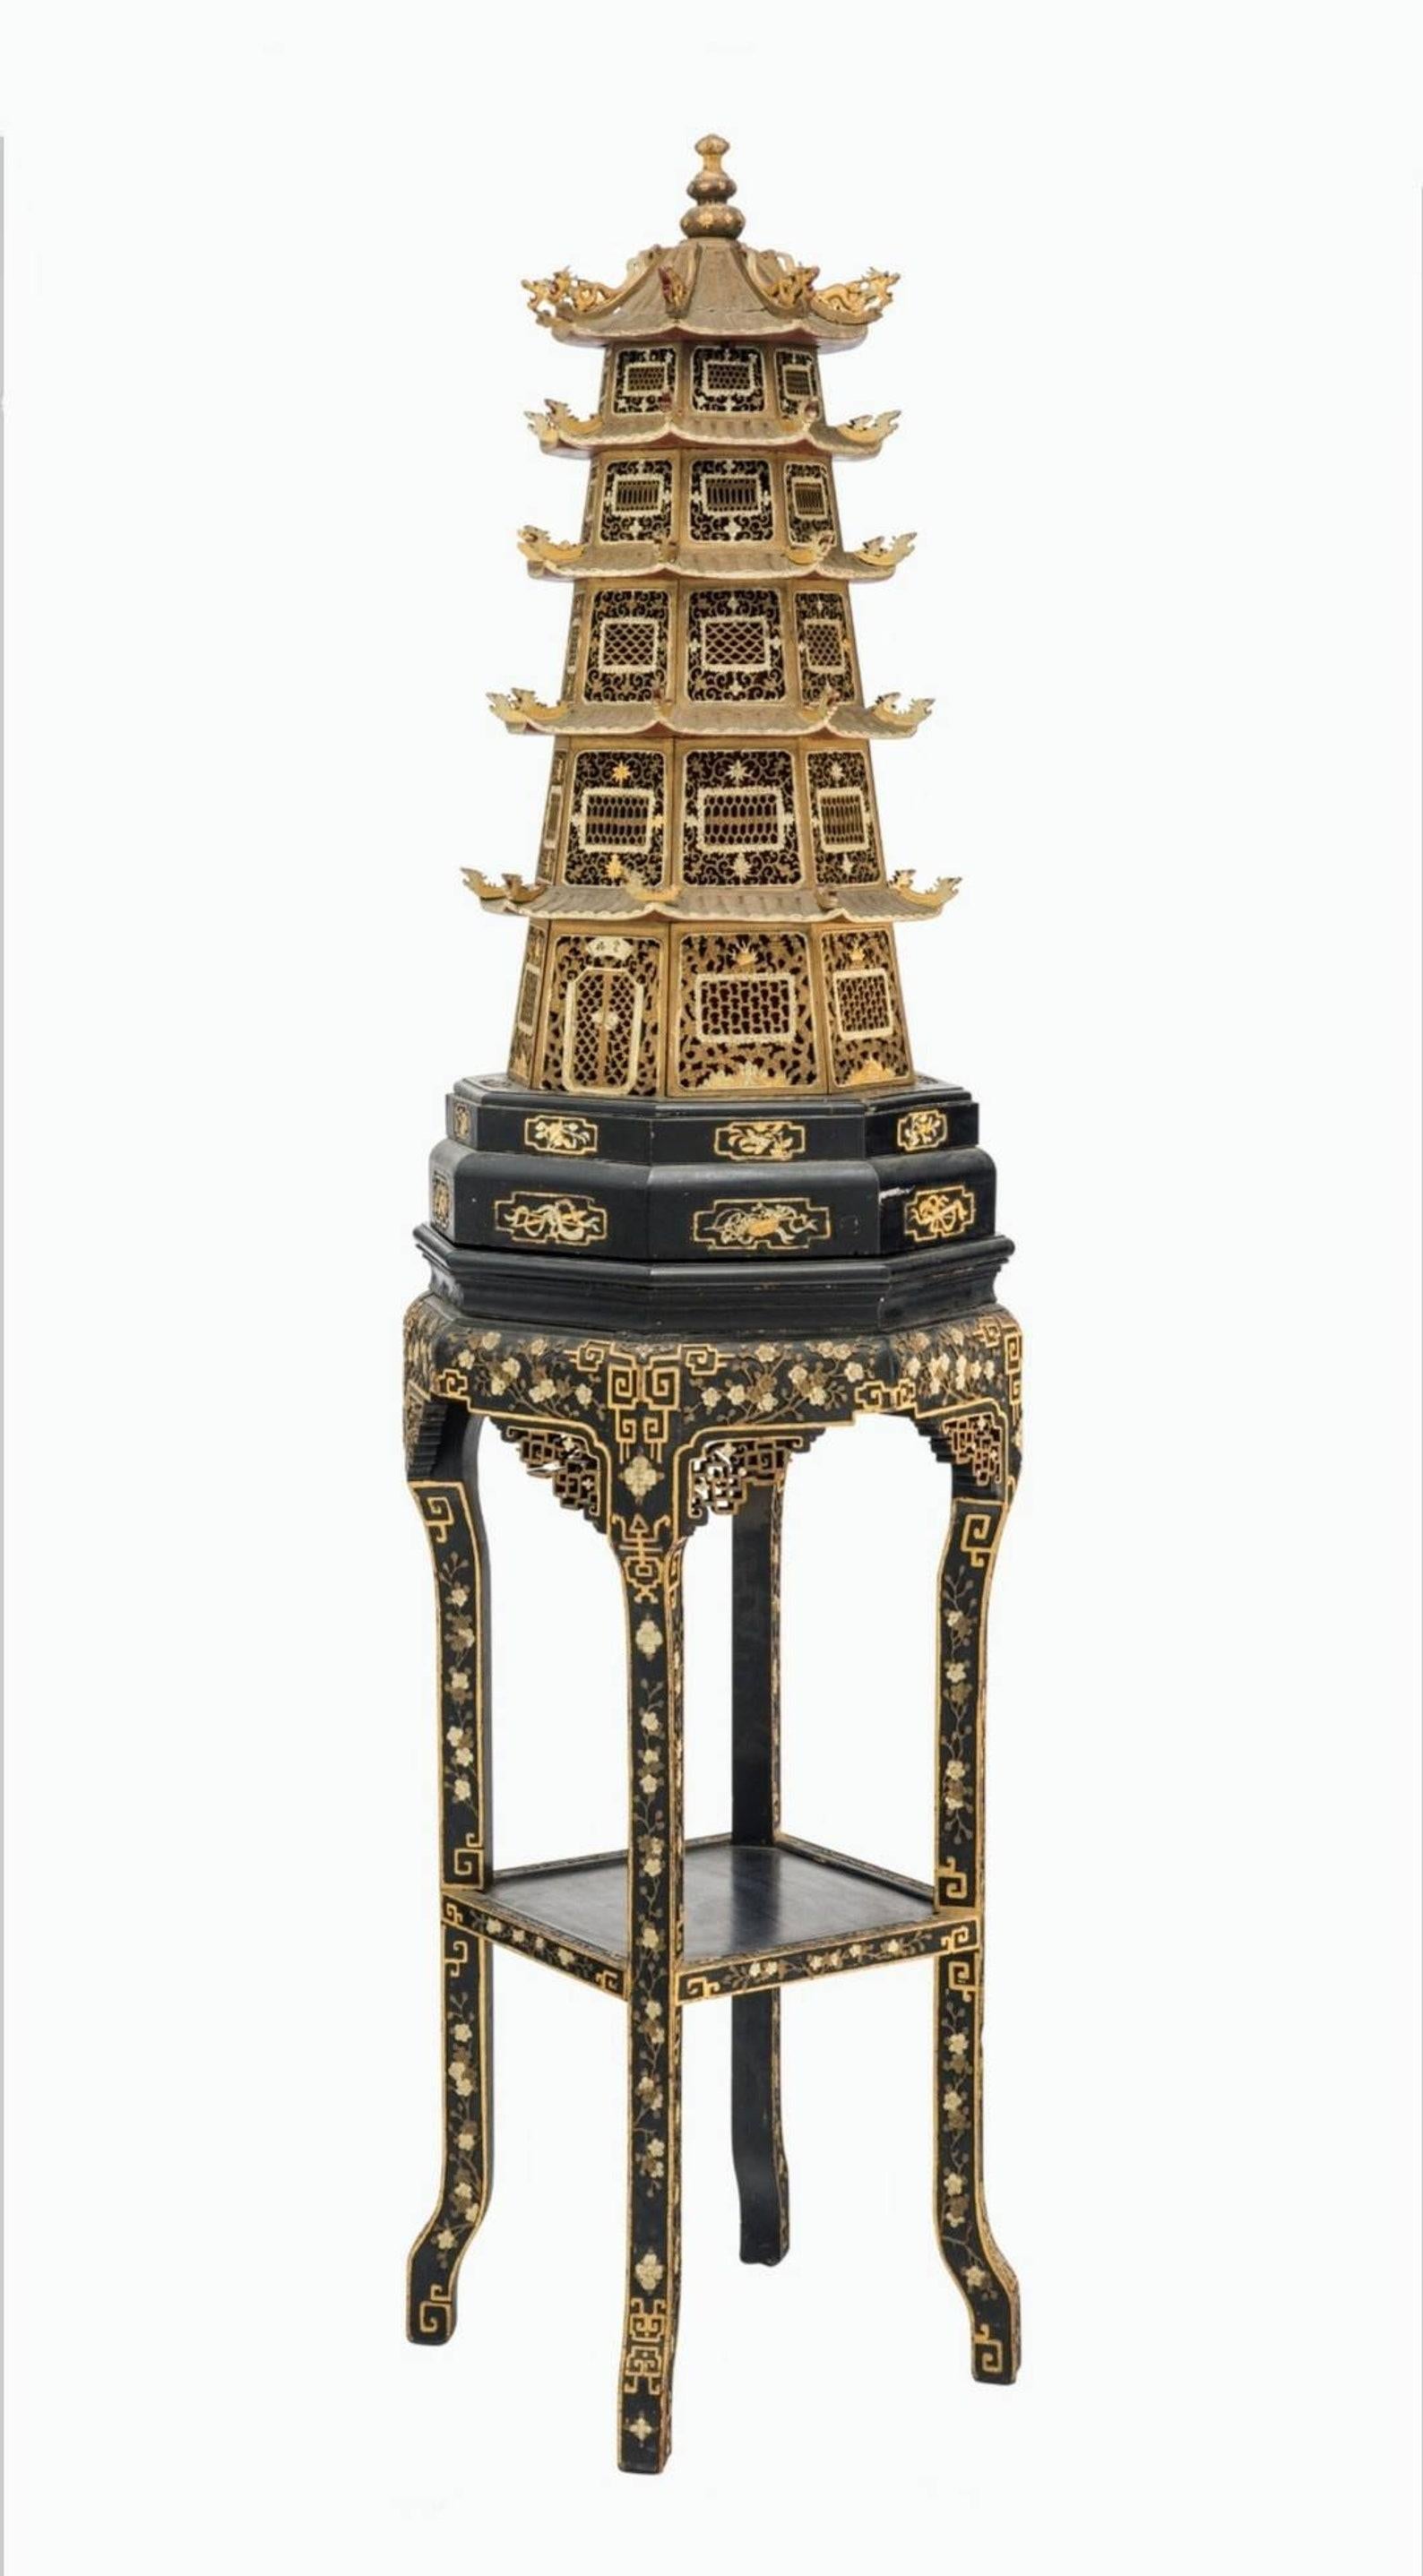 A magnificent Qing Dynasty (1636-1912) Chinese temple altar pagoda fashioned as a large one-of-a-kind sculptural floor lamp.

Exquisitely hand-crafted in China in the 19th century, the exceptionally executed intricately detailed architectural pagoda